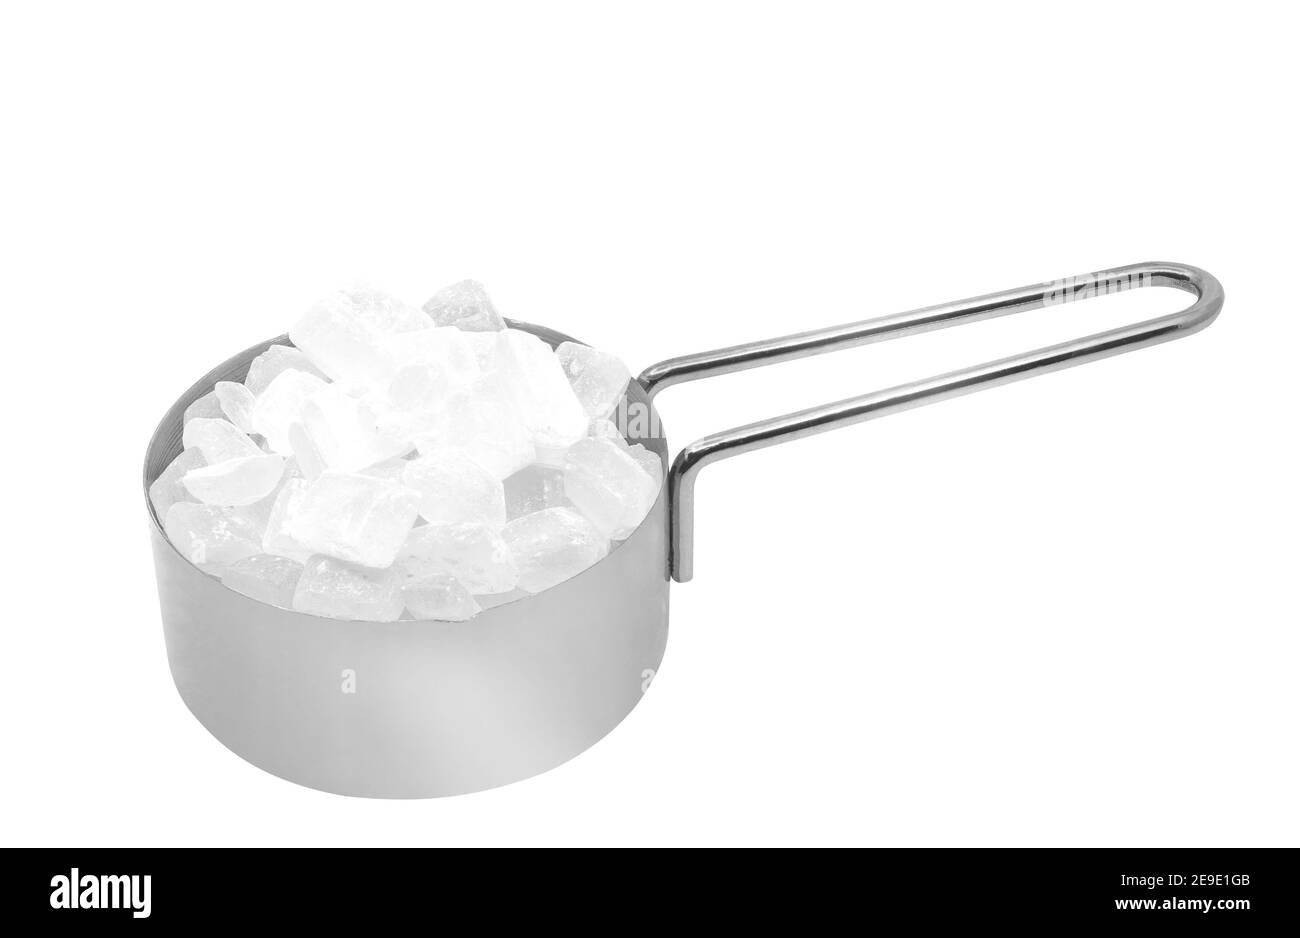 Isolated rock sugar in metal measuring cup on white background. Close up stainless steel measuring cup with rock sugar. Stock Photo